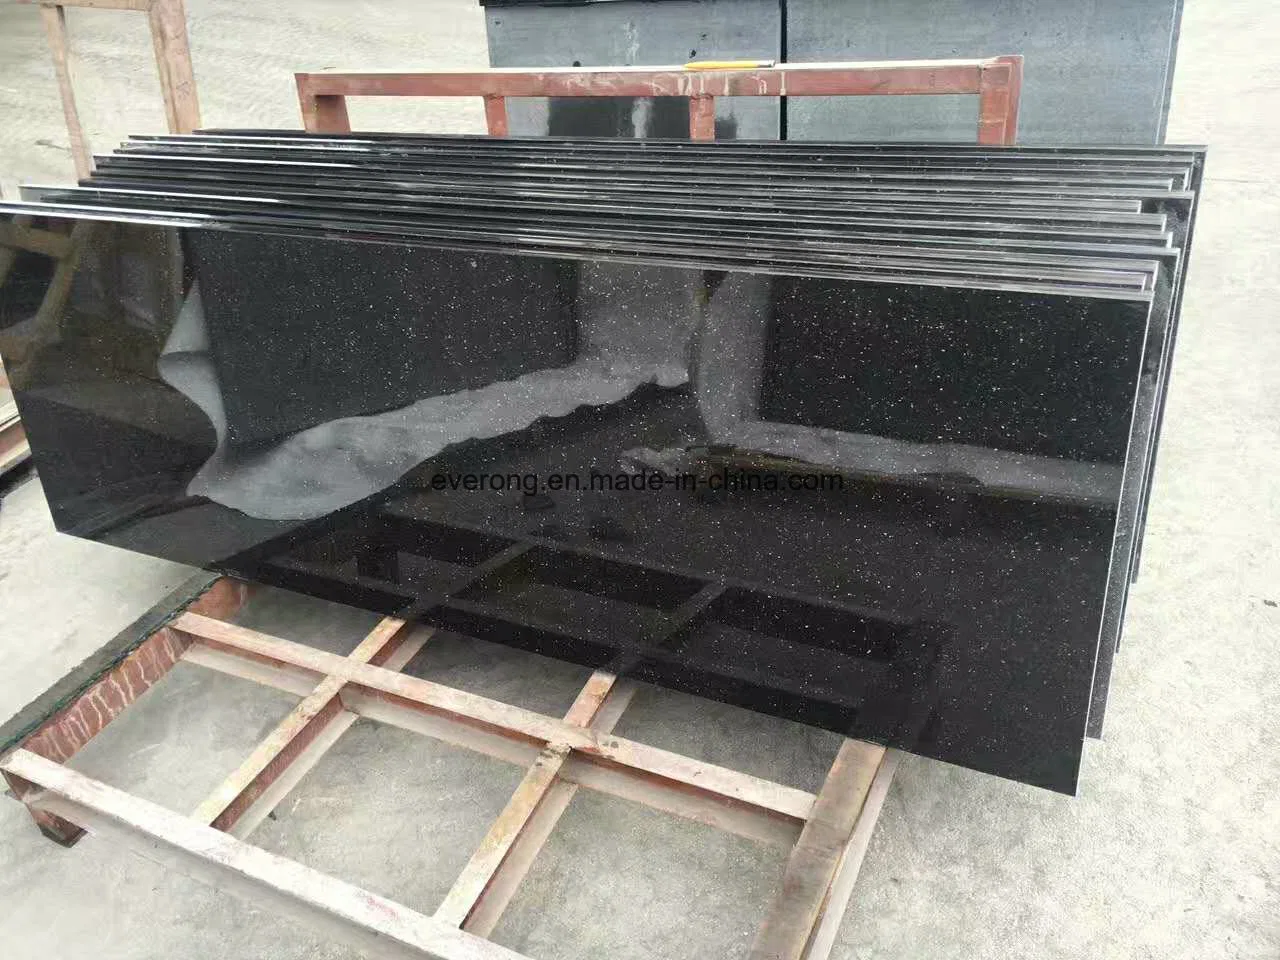 Polished Star Galaxy, Black Galaxy Granite Stone Wall Tile for Project Construction